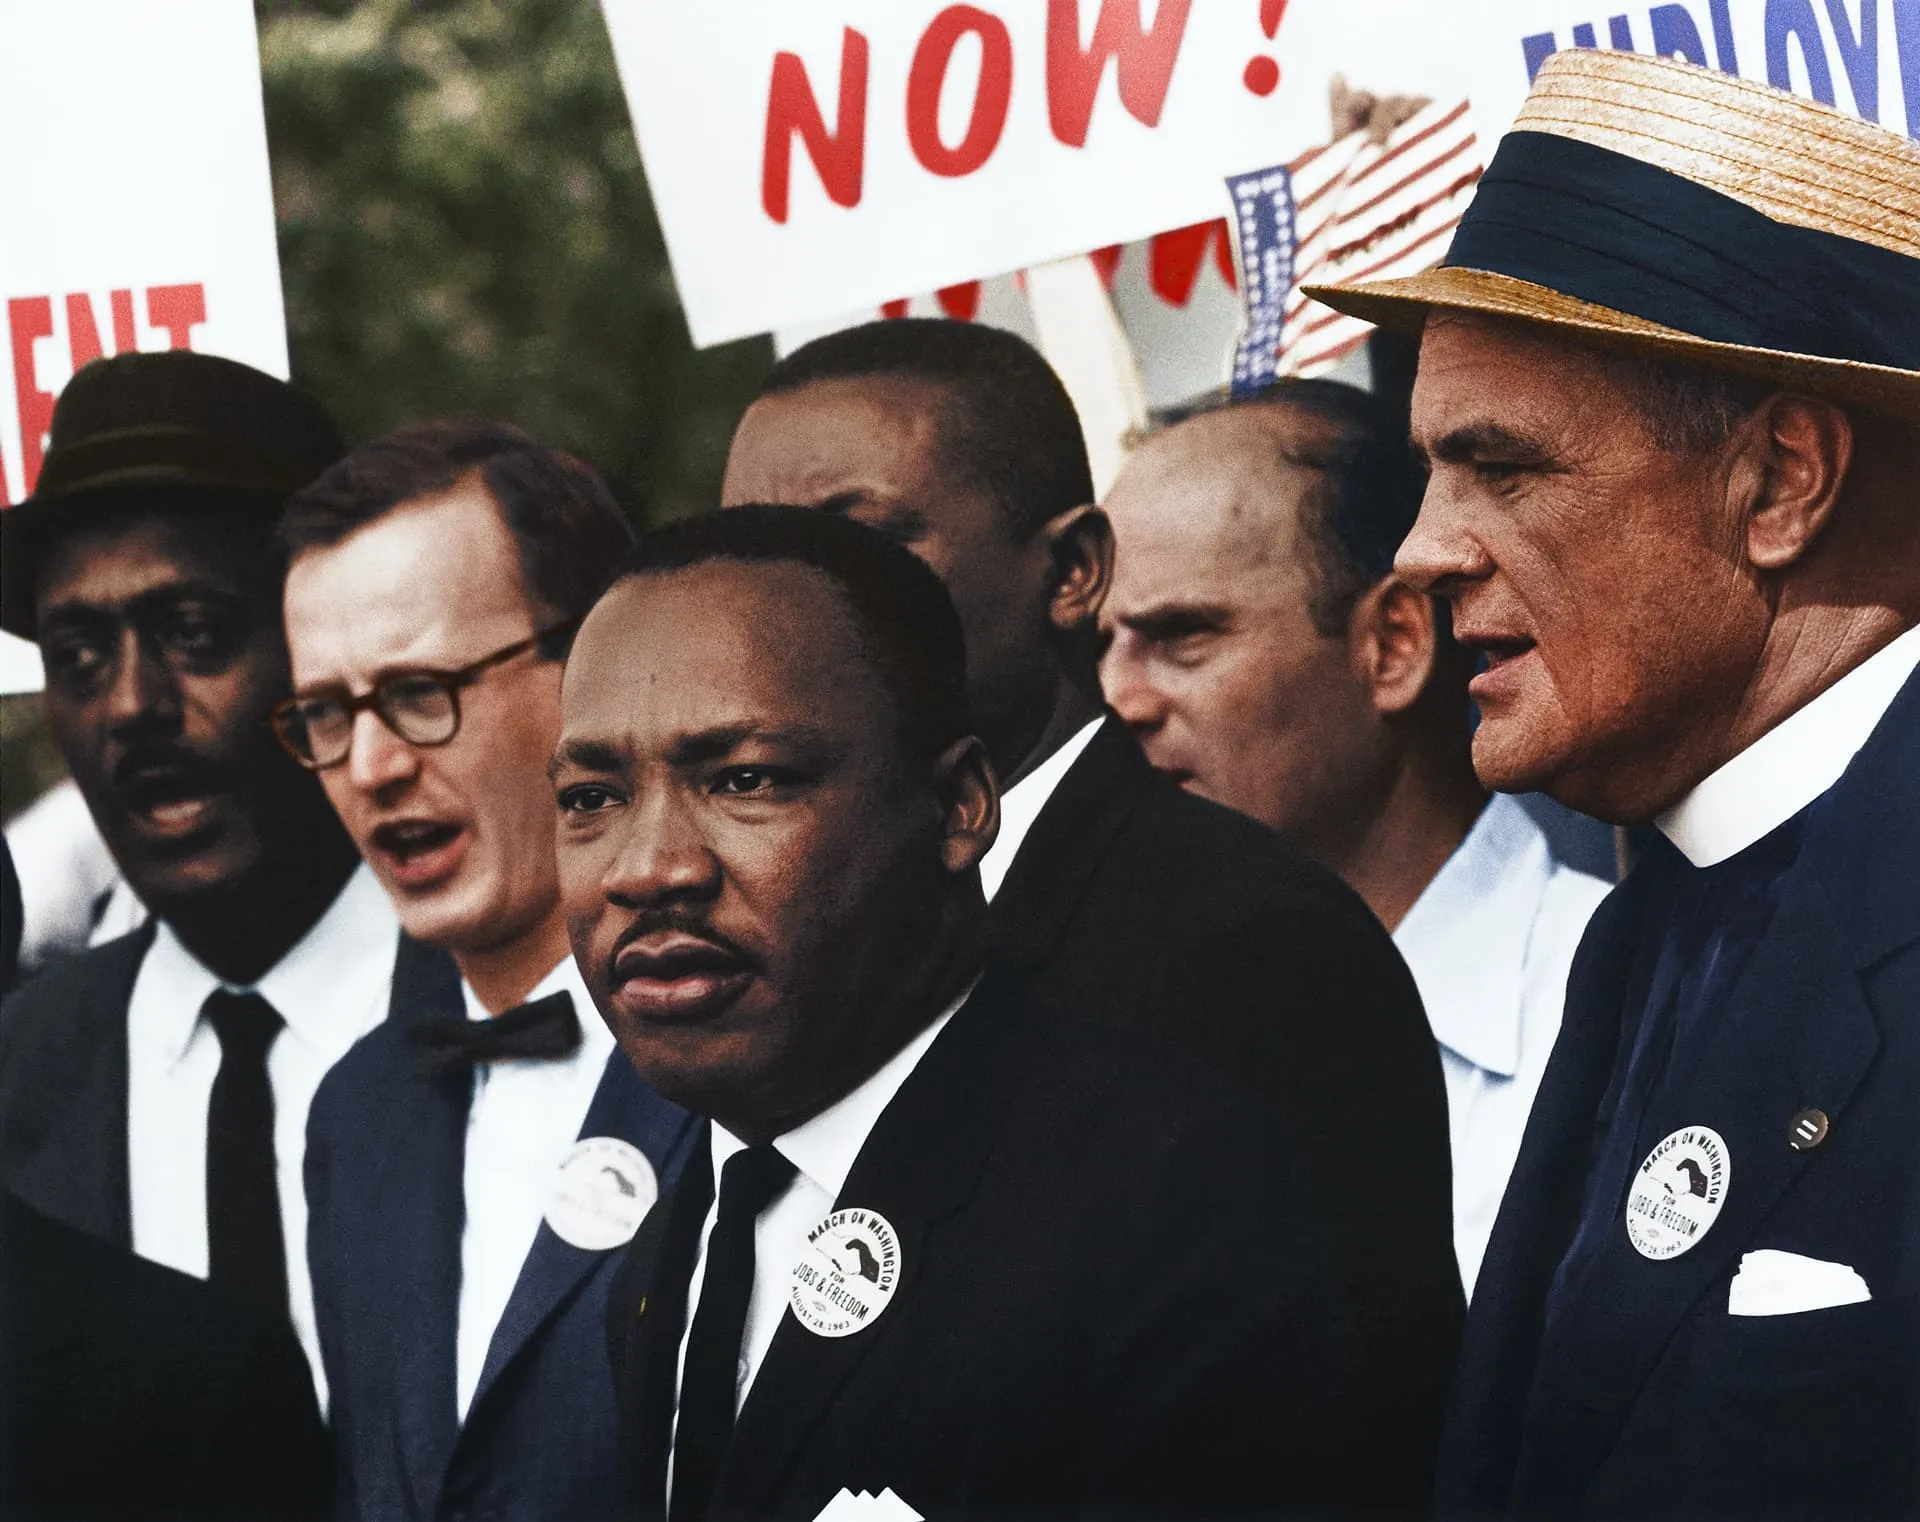 Martin Luther King Jr.'s major accomplishments include receiving a Nobel Prize for being a civil rights activist.